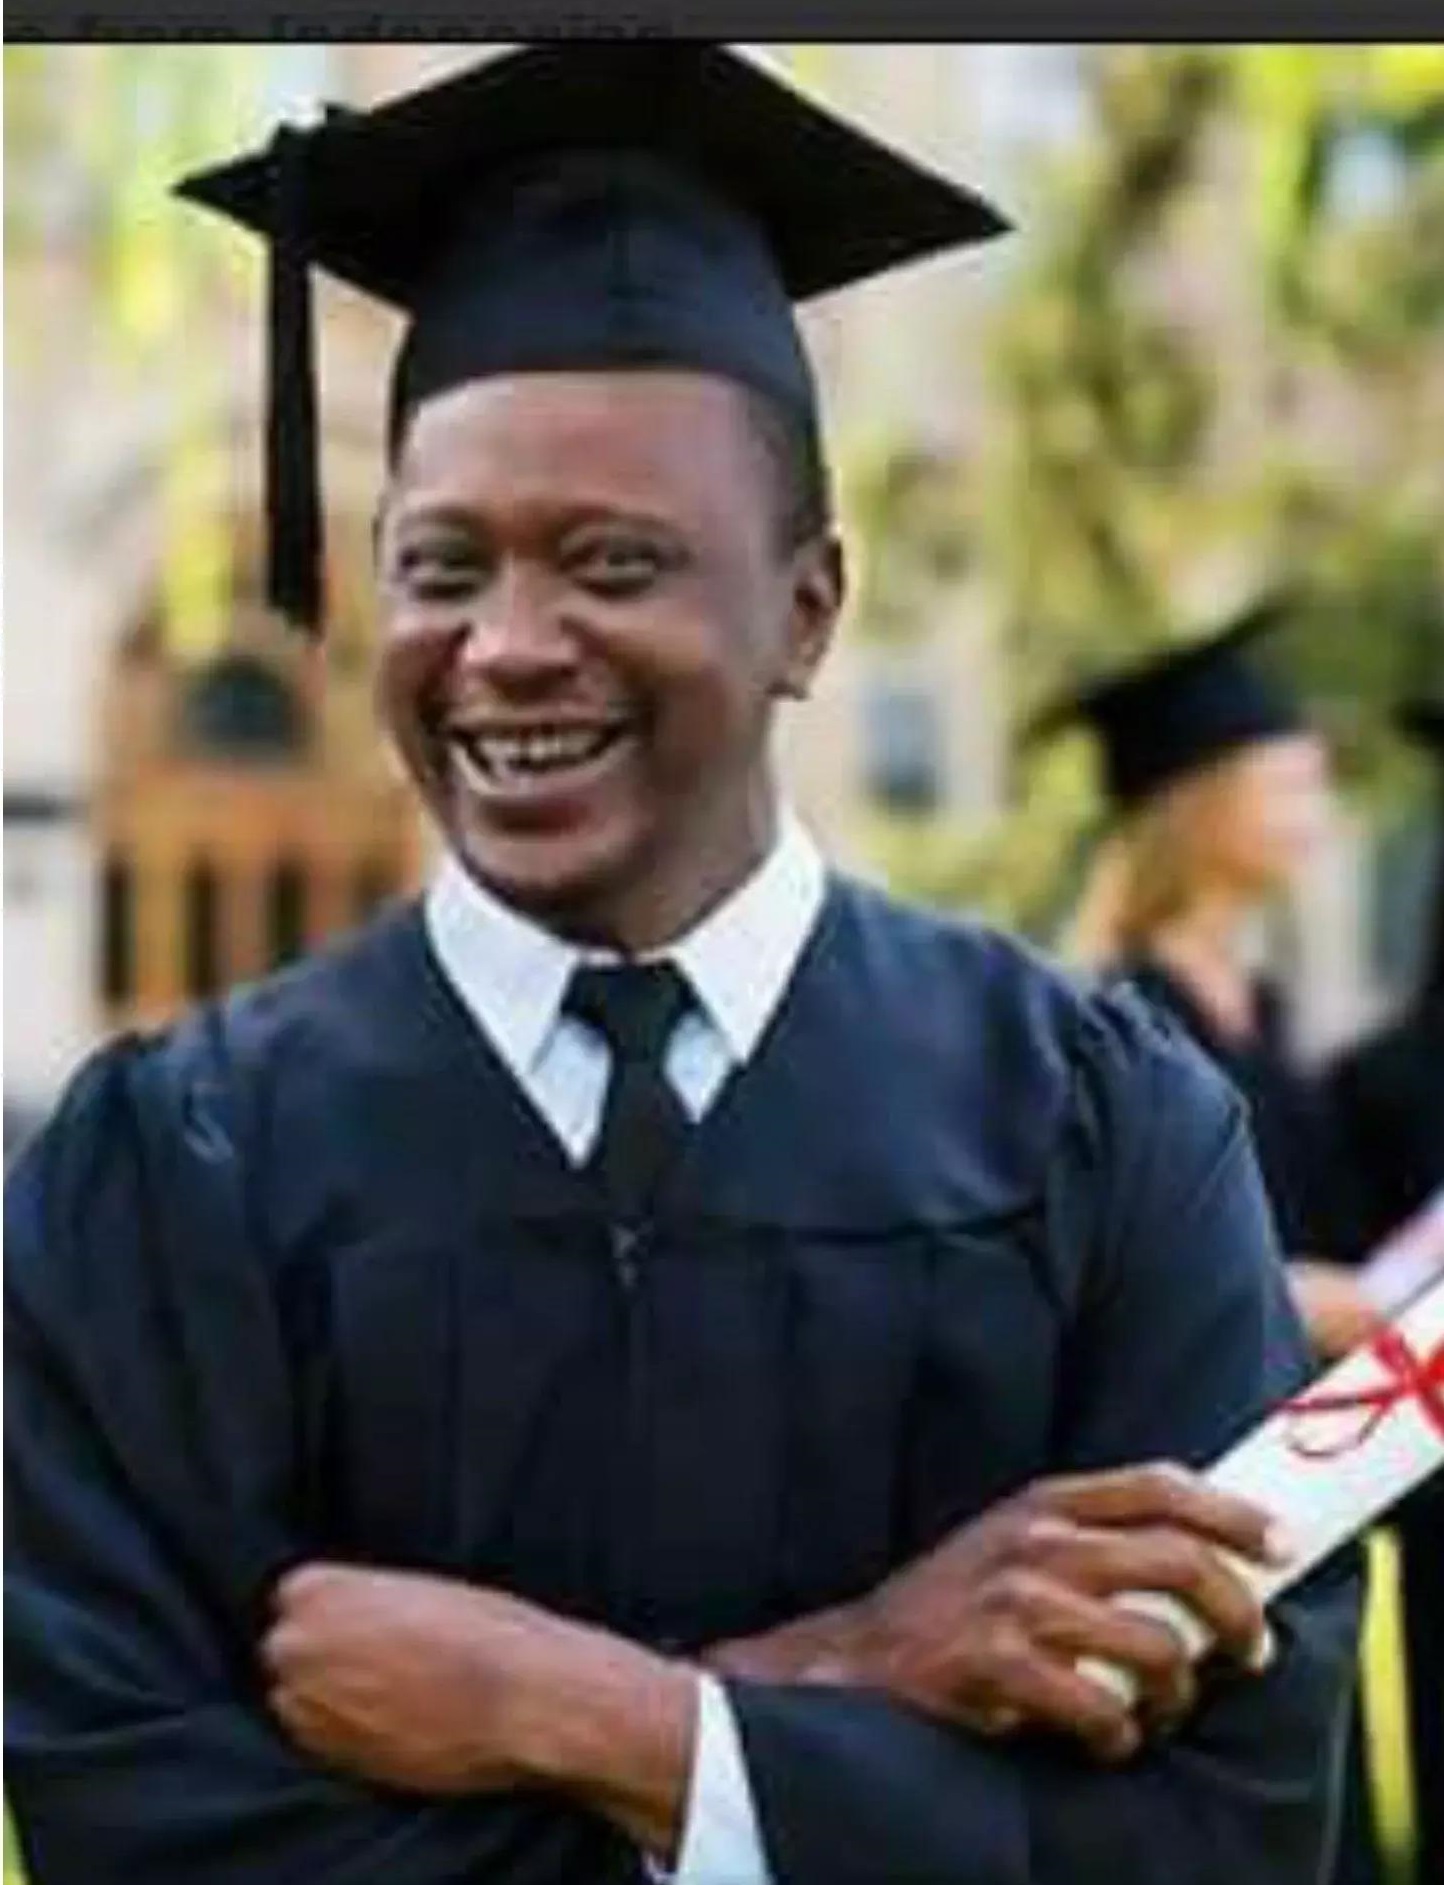 President Uhuru college declines to release his grades - Business Today Kenya